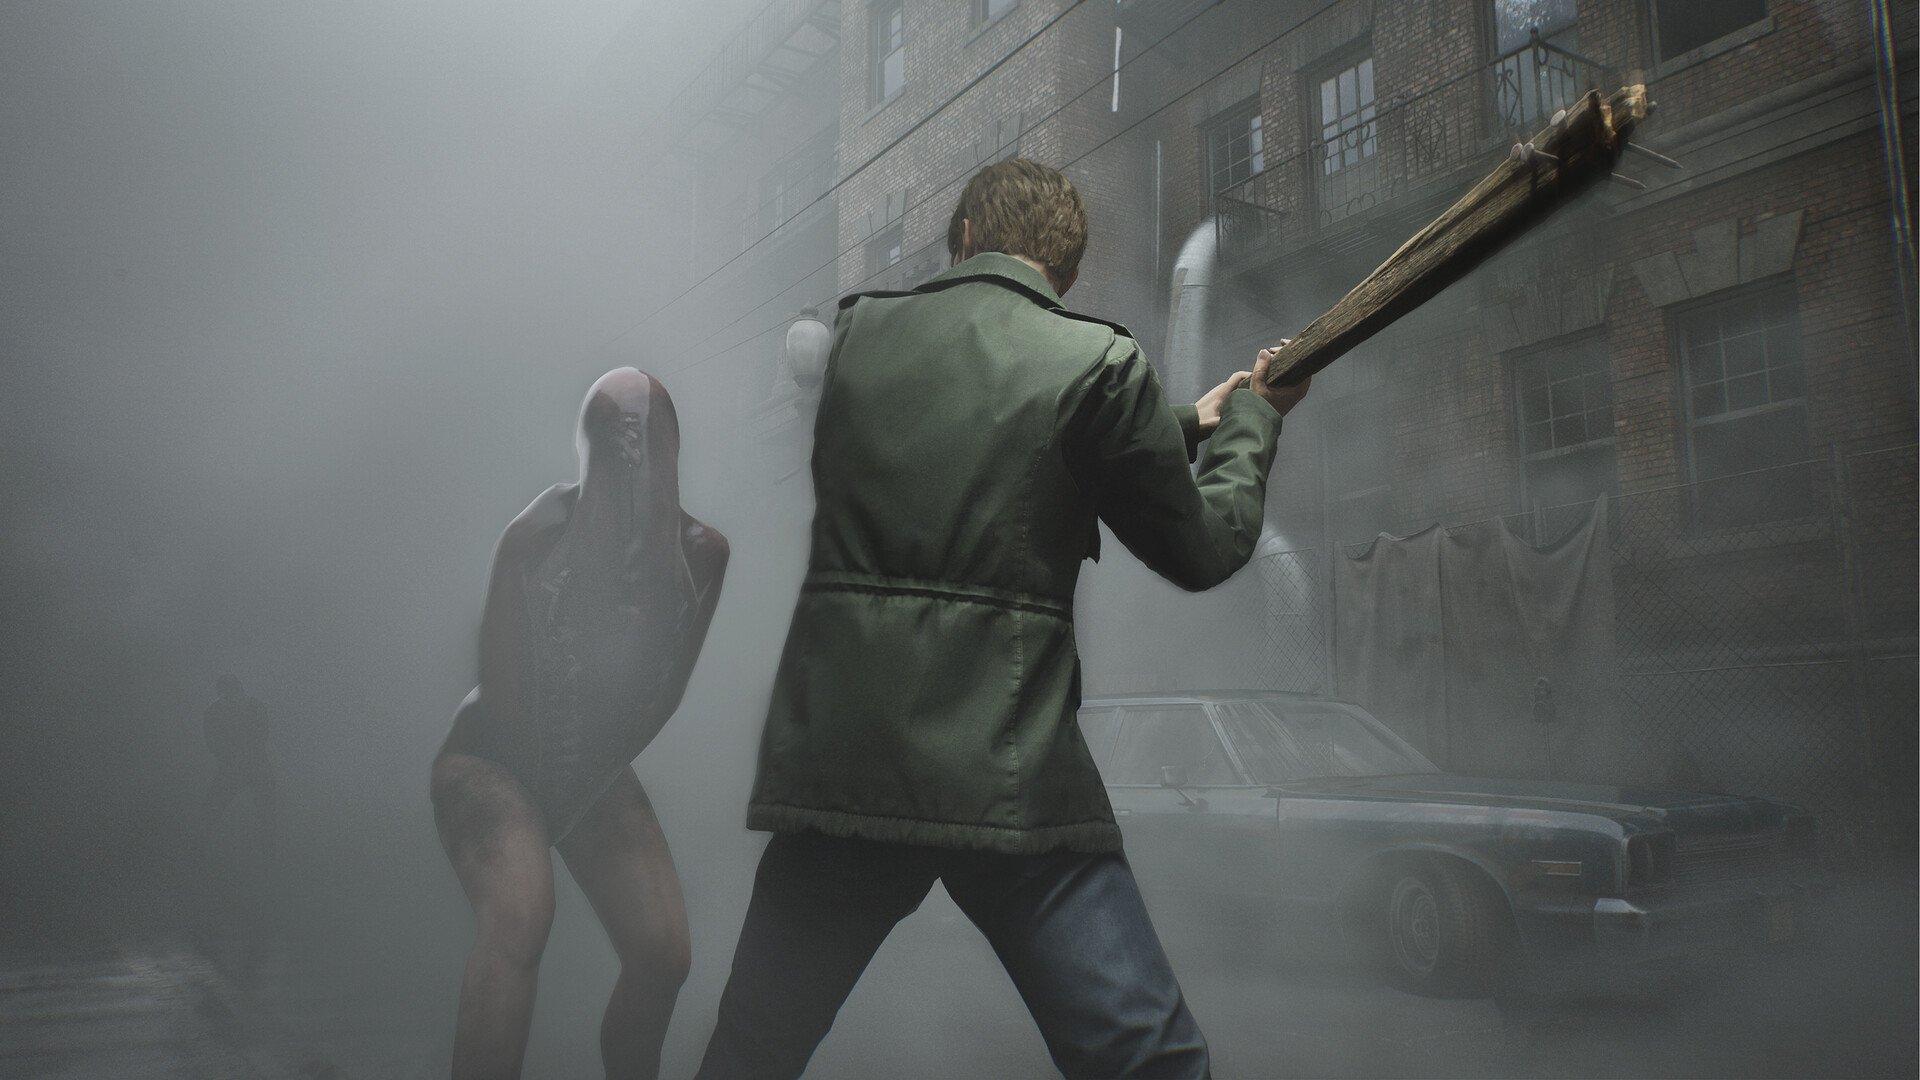 Silent Hill 2 Remake for PlayStation 5